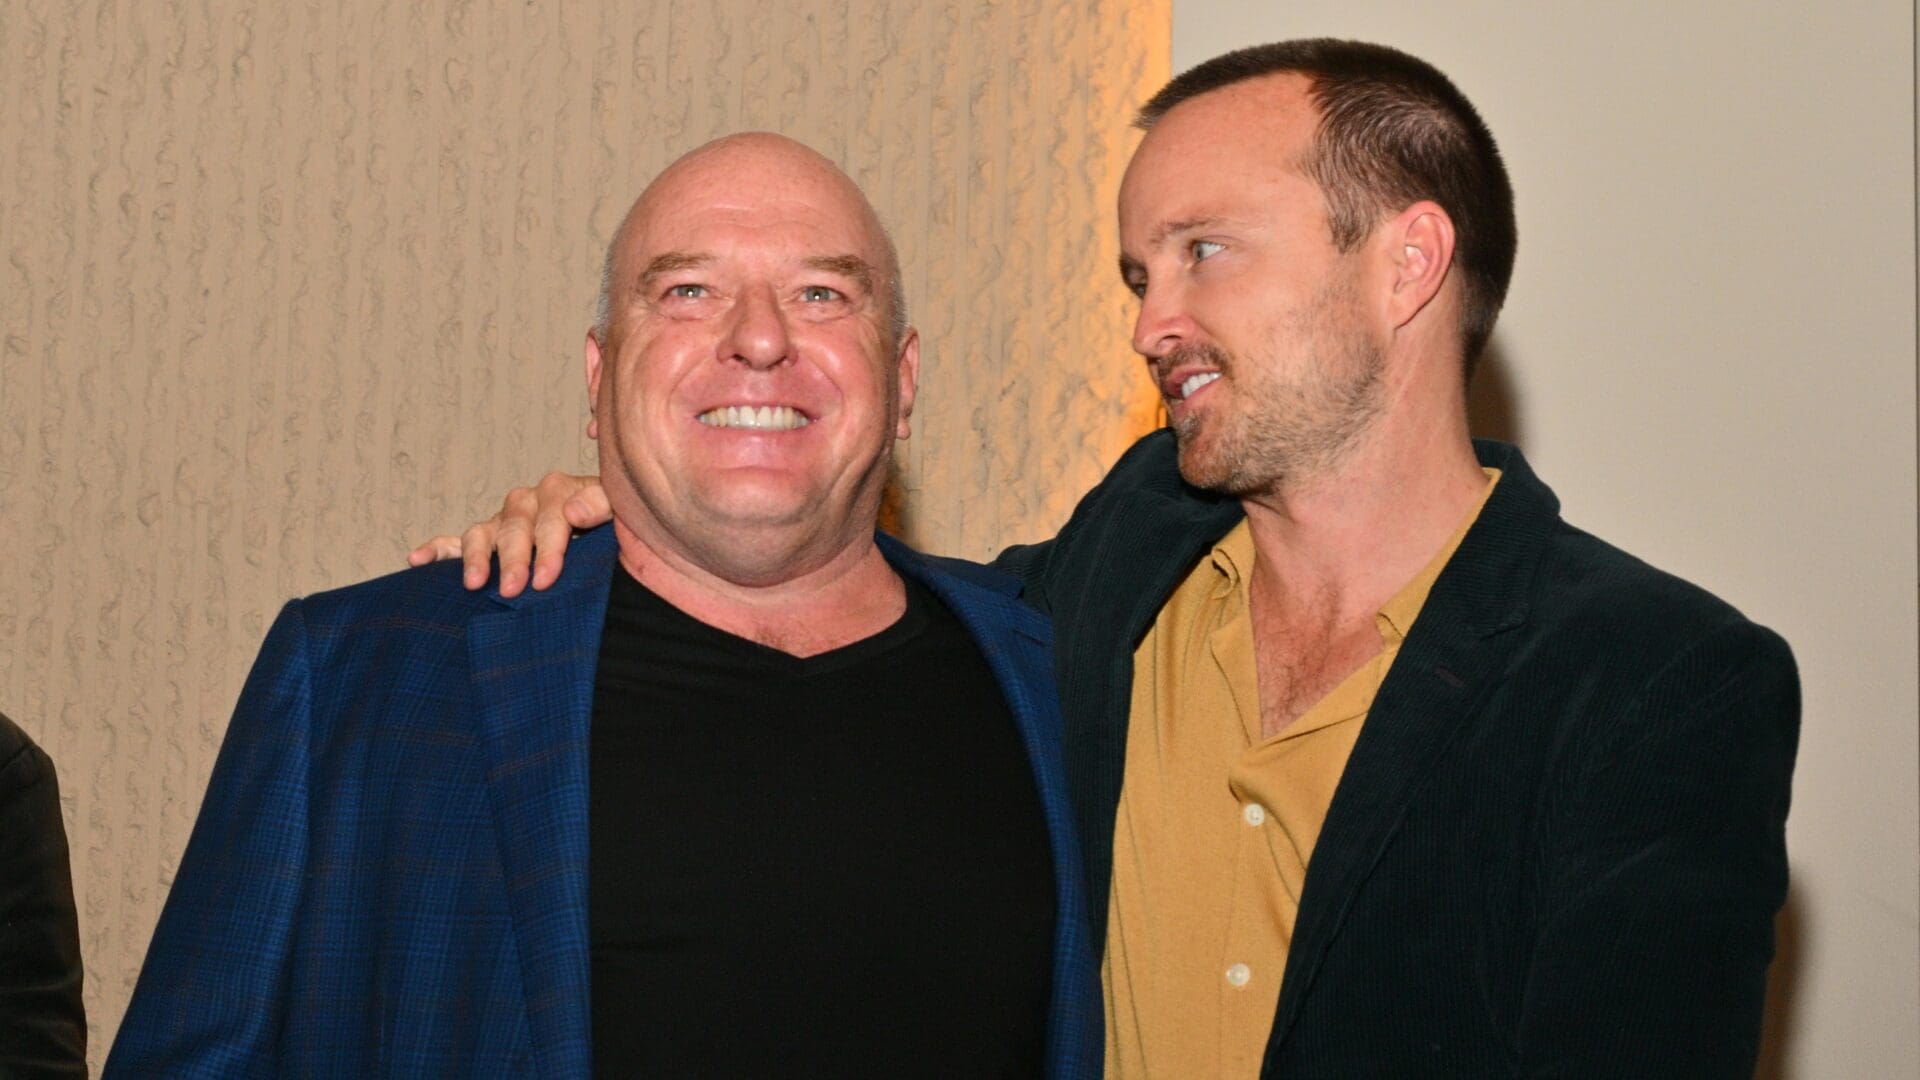 Actor Aaron Paul (R) hugs actor Dean Norris during an unveiling ceremony of bronze statues depicting television characters Walter White, played by actor Bryan Cranston, and Jesse Pinkman, played by Paul, from the series "Breaking Bad" at the Albuquerque Convention Center on July 29, 2022 in Albuquerque, New Mexico.